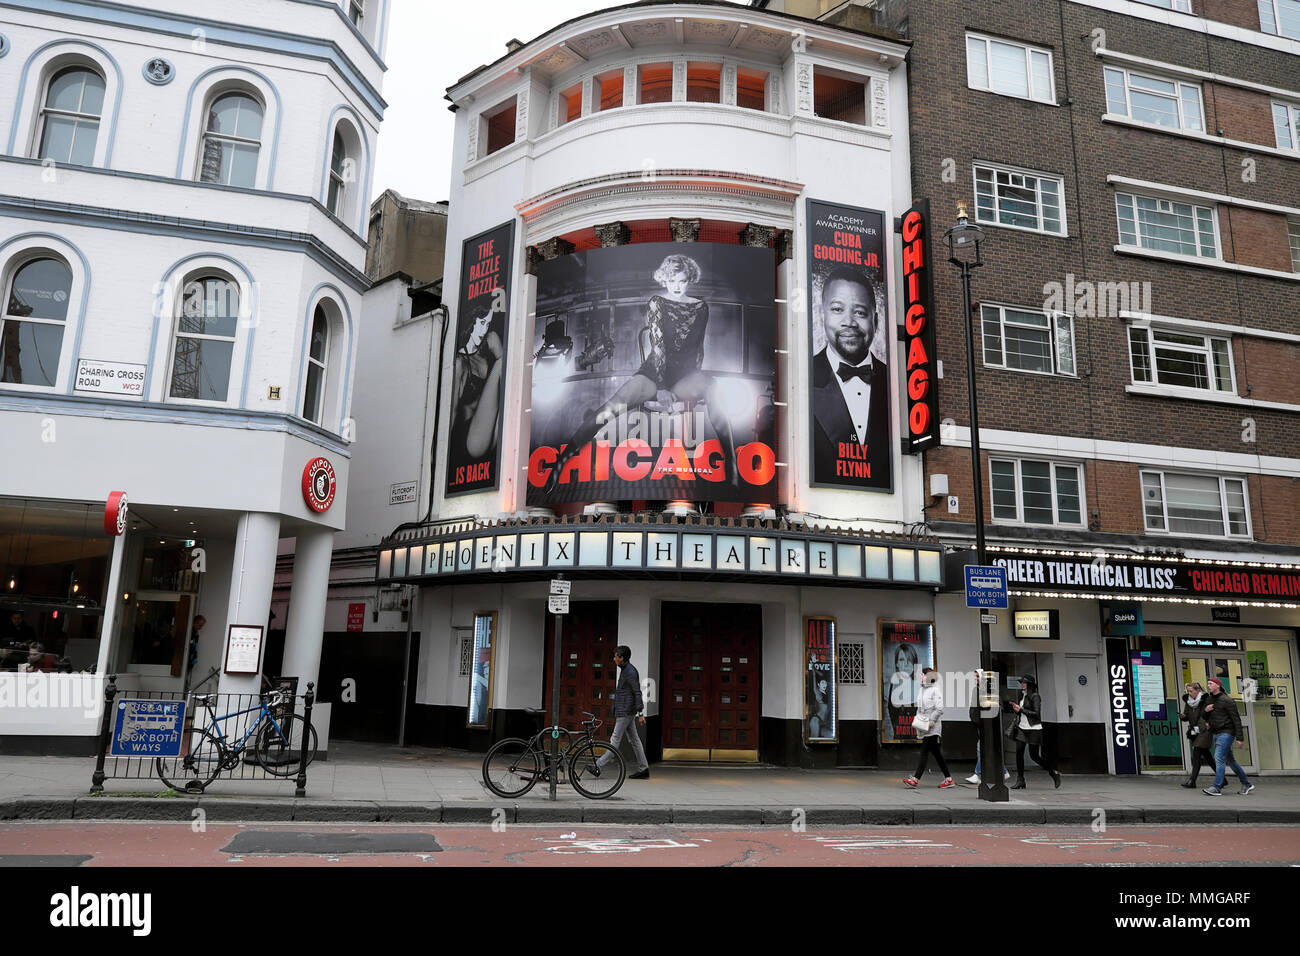 Exterior view of Phoenix Theatre with advertisement for Chicago actor Cuba Gooding Jr on Charing Cross Road in London WC2 England UK  KATHY DEWITT Stock Photo